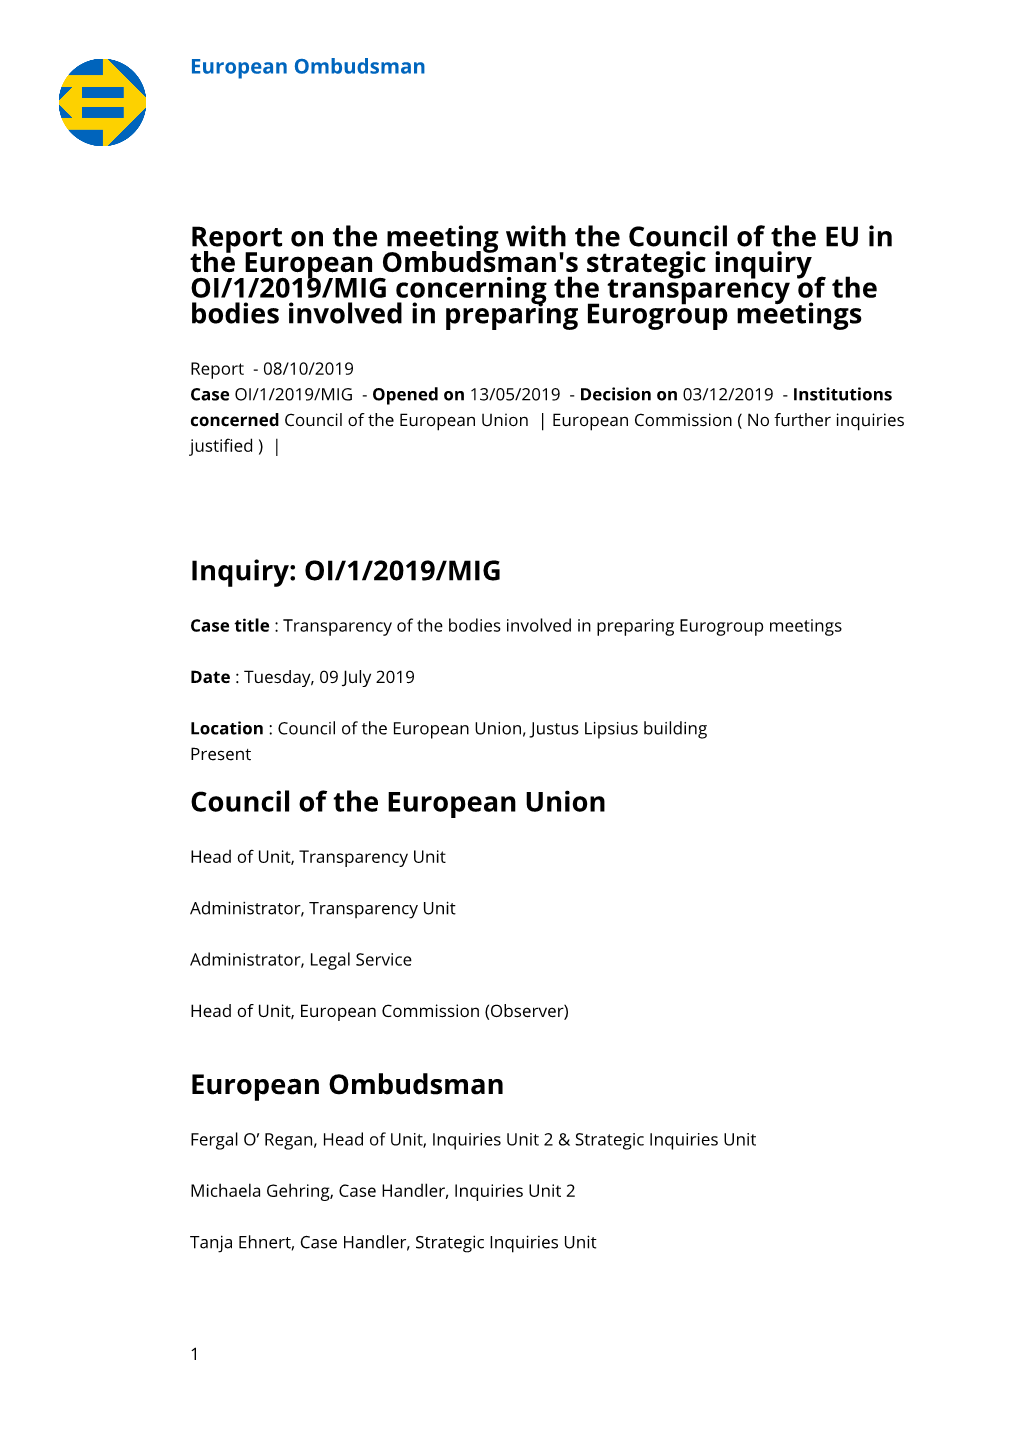 Report on the Meeting with the Council of the EU in the European Ombudsman's Strategic Inquiry OI/1/2019/MIG Concerning the Tran